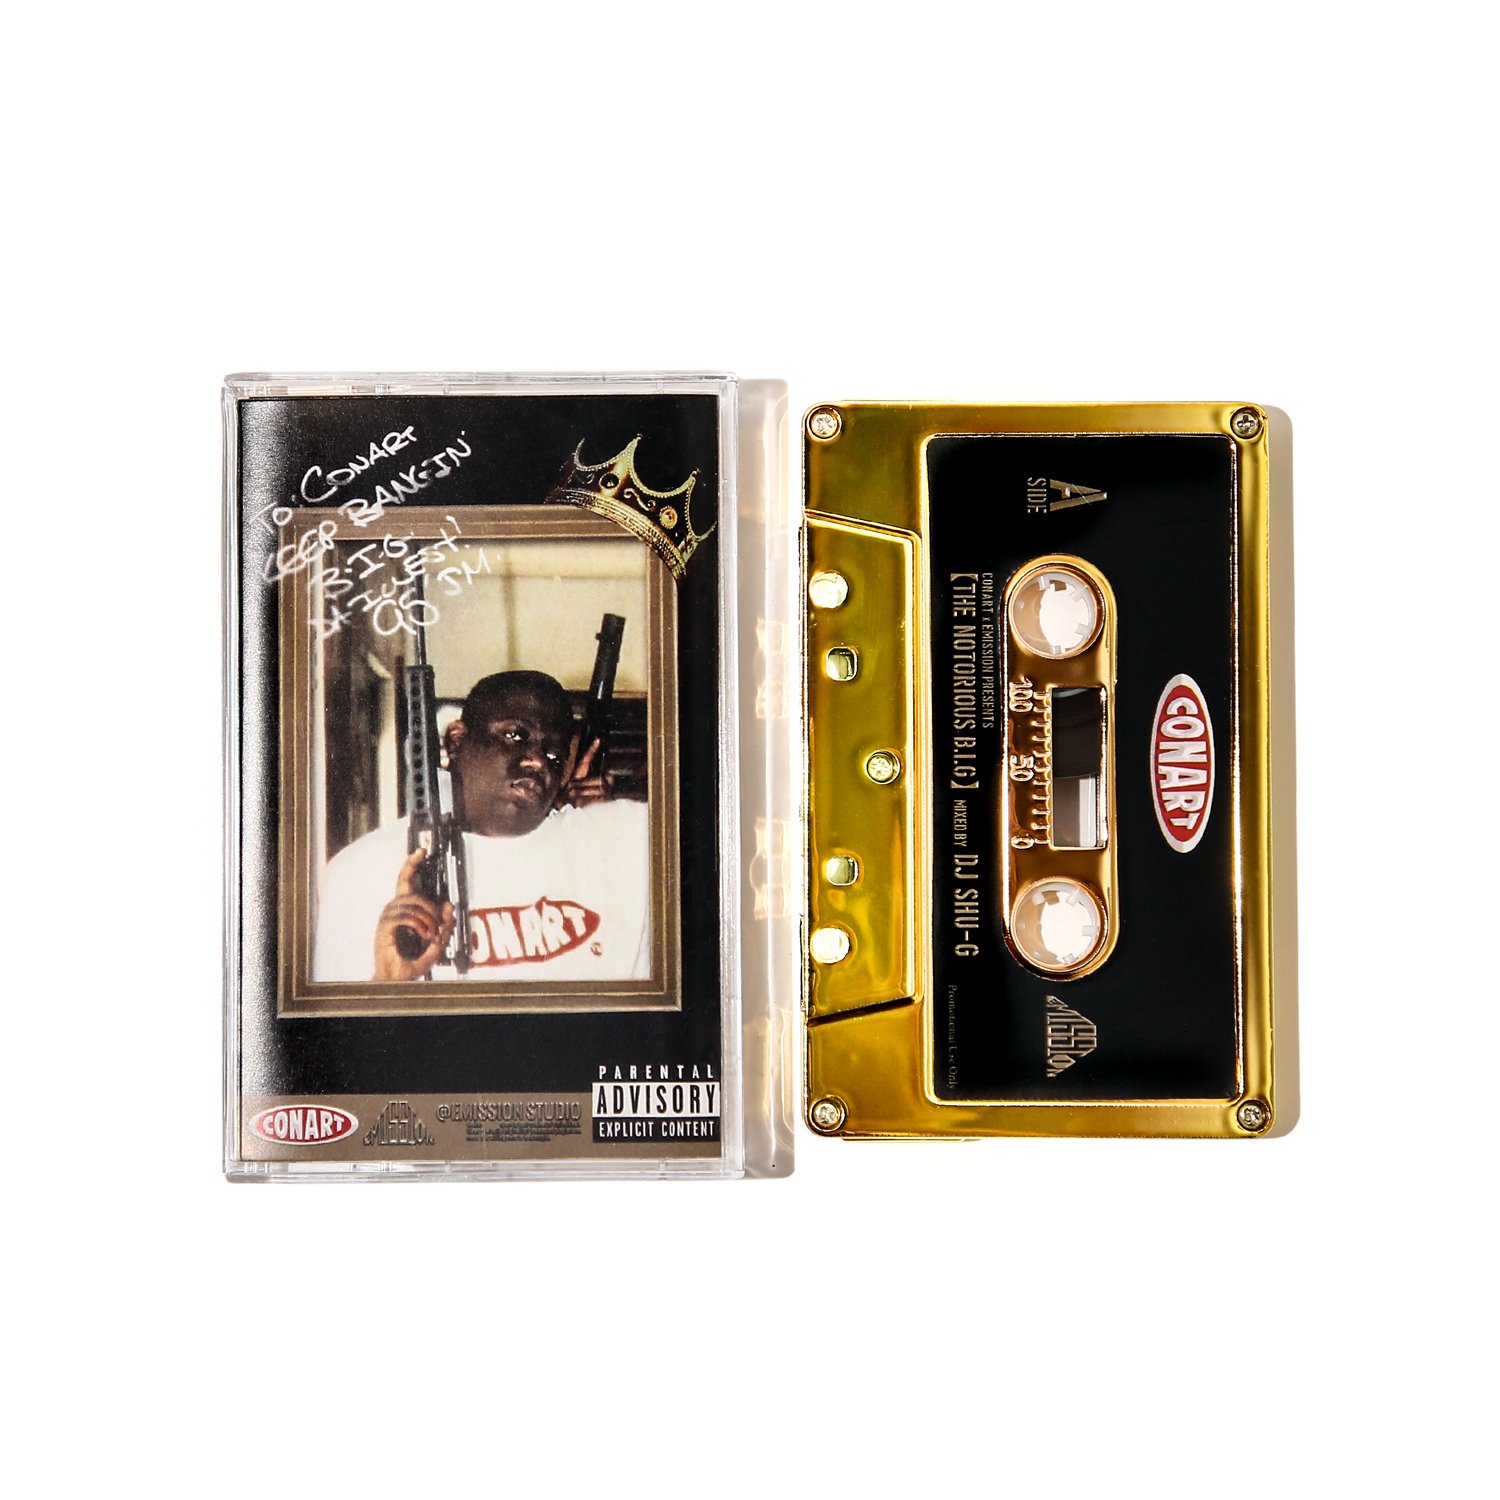 CASSETTE TAPE】The Notorious B.I.G Mix - EMISSION